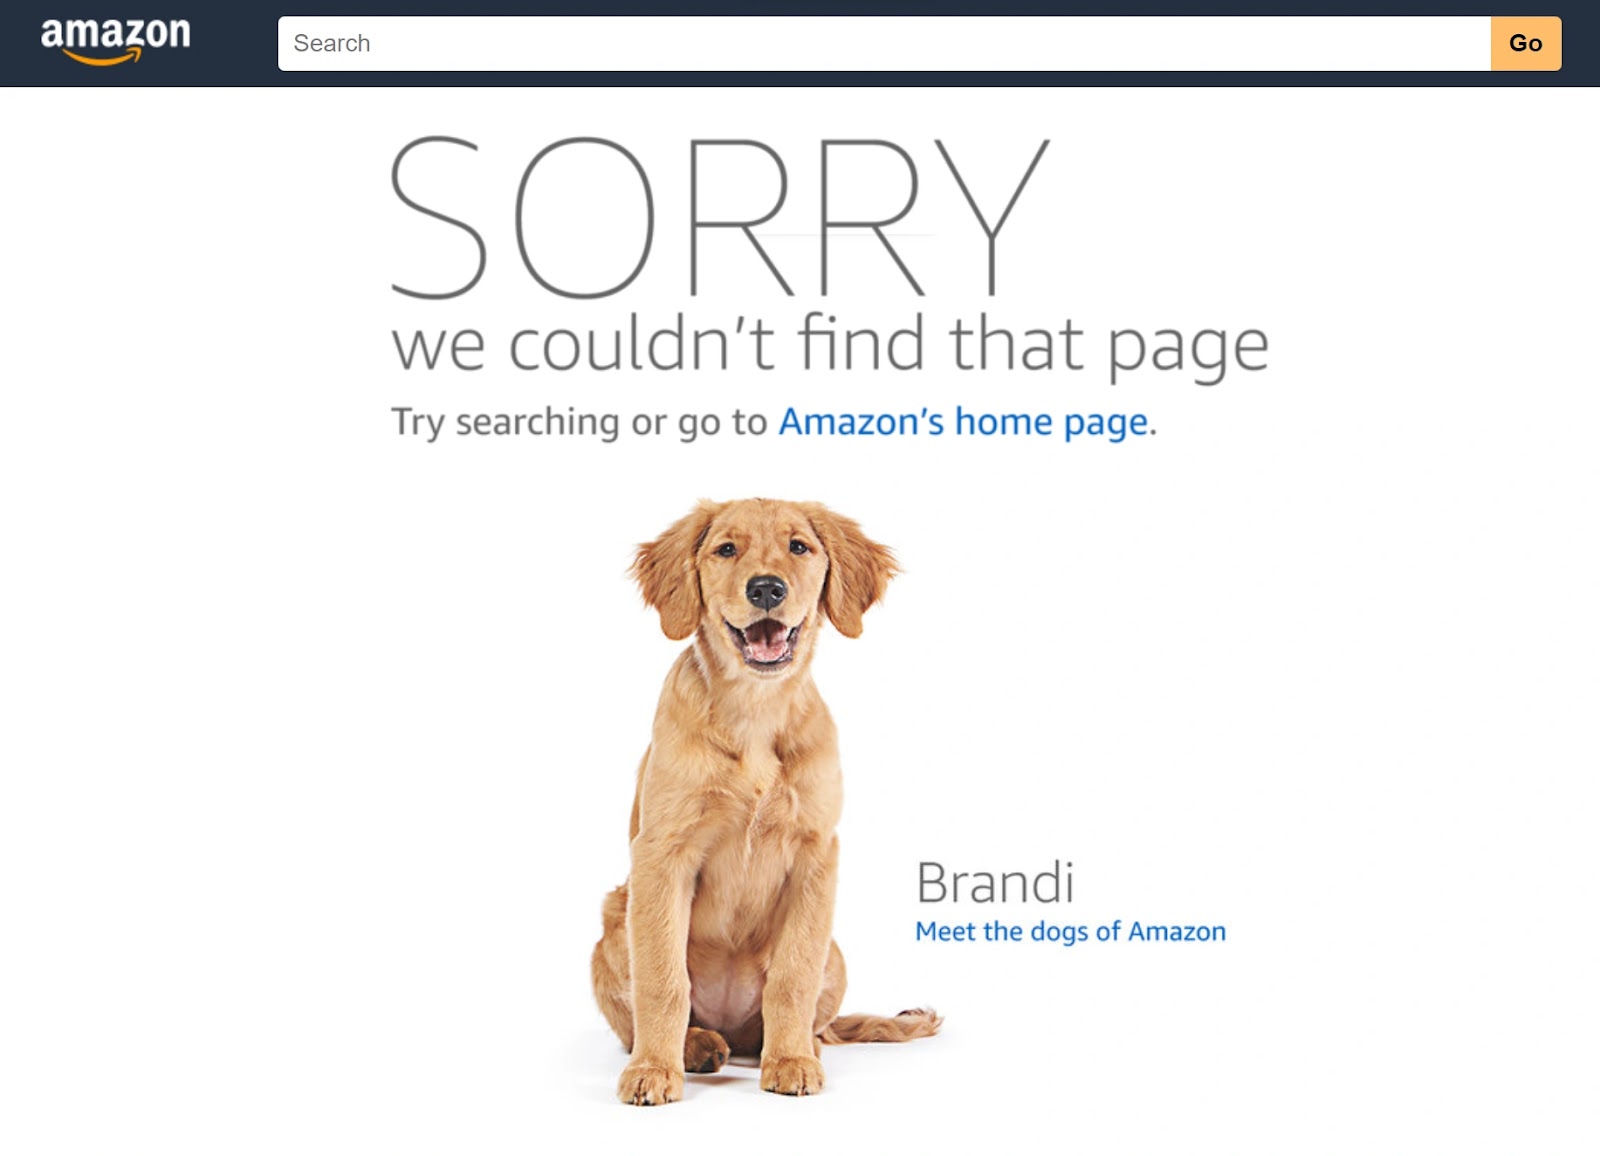 Amazon's custom 404 page with an image of a dog named "Brandi"